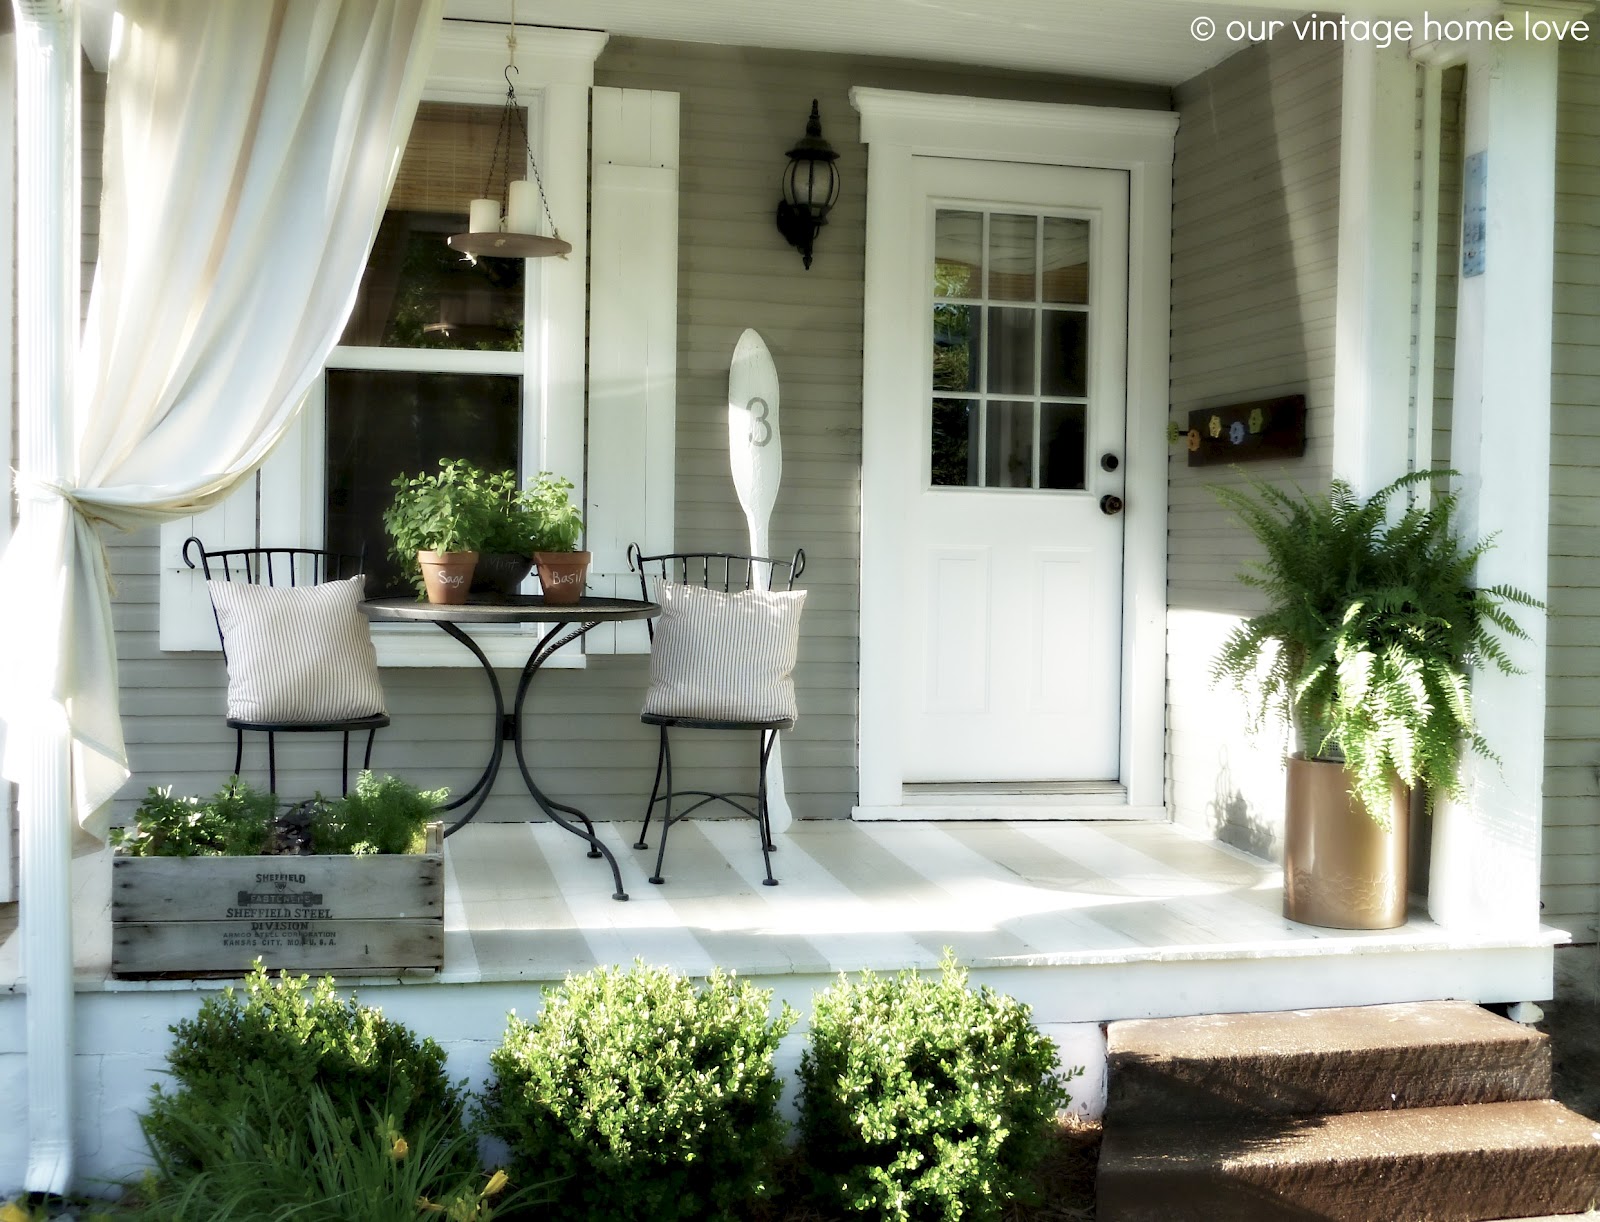 our vintage home love: Back/Side Porch Ideas For Summer and An ...